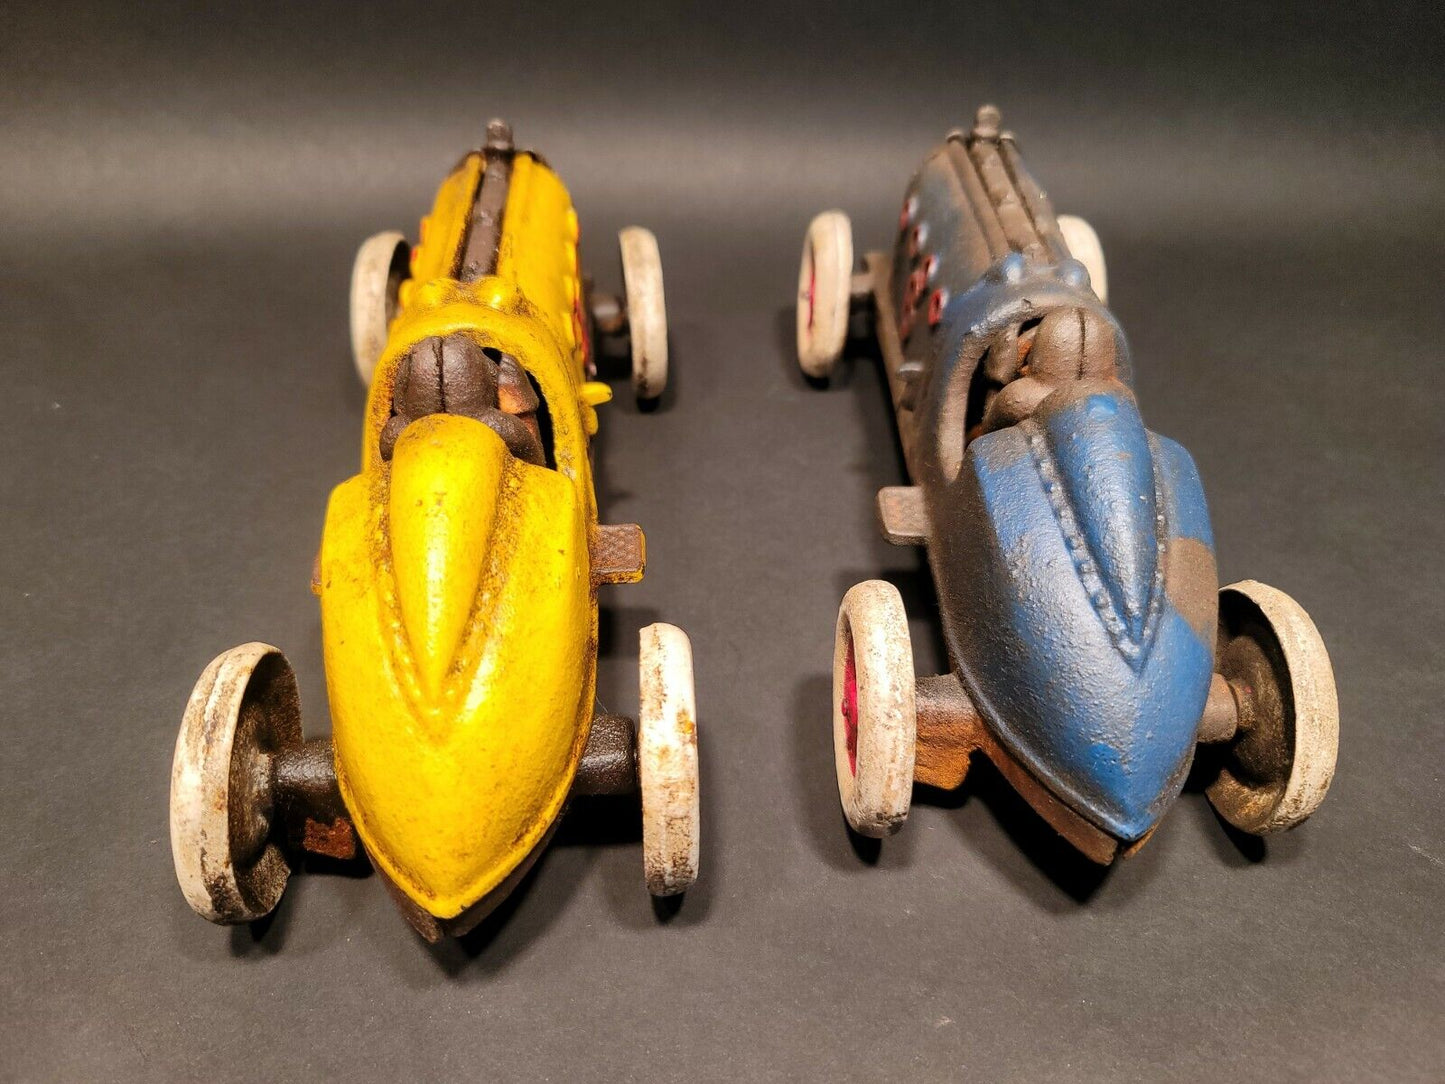 2 Antique Vintage Style Cast Iron Toy Race Cars w Lifting Hood